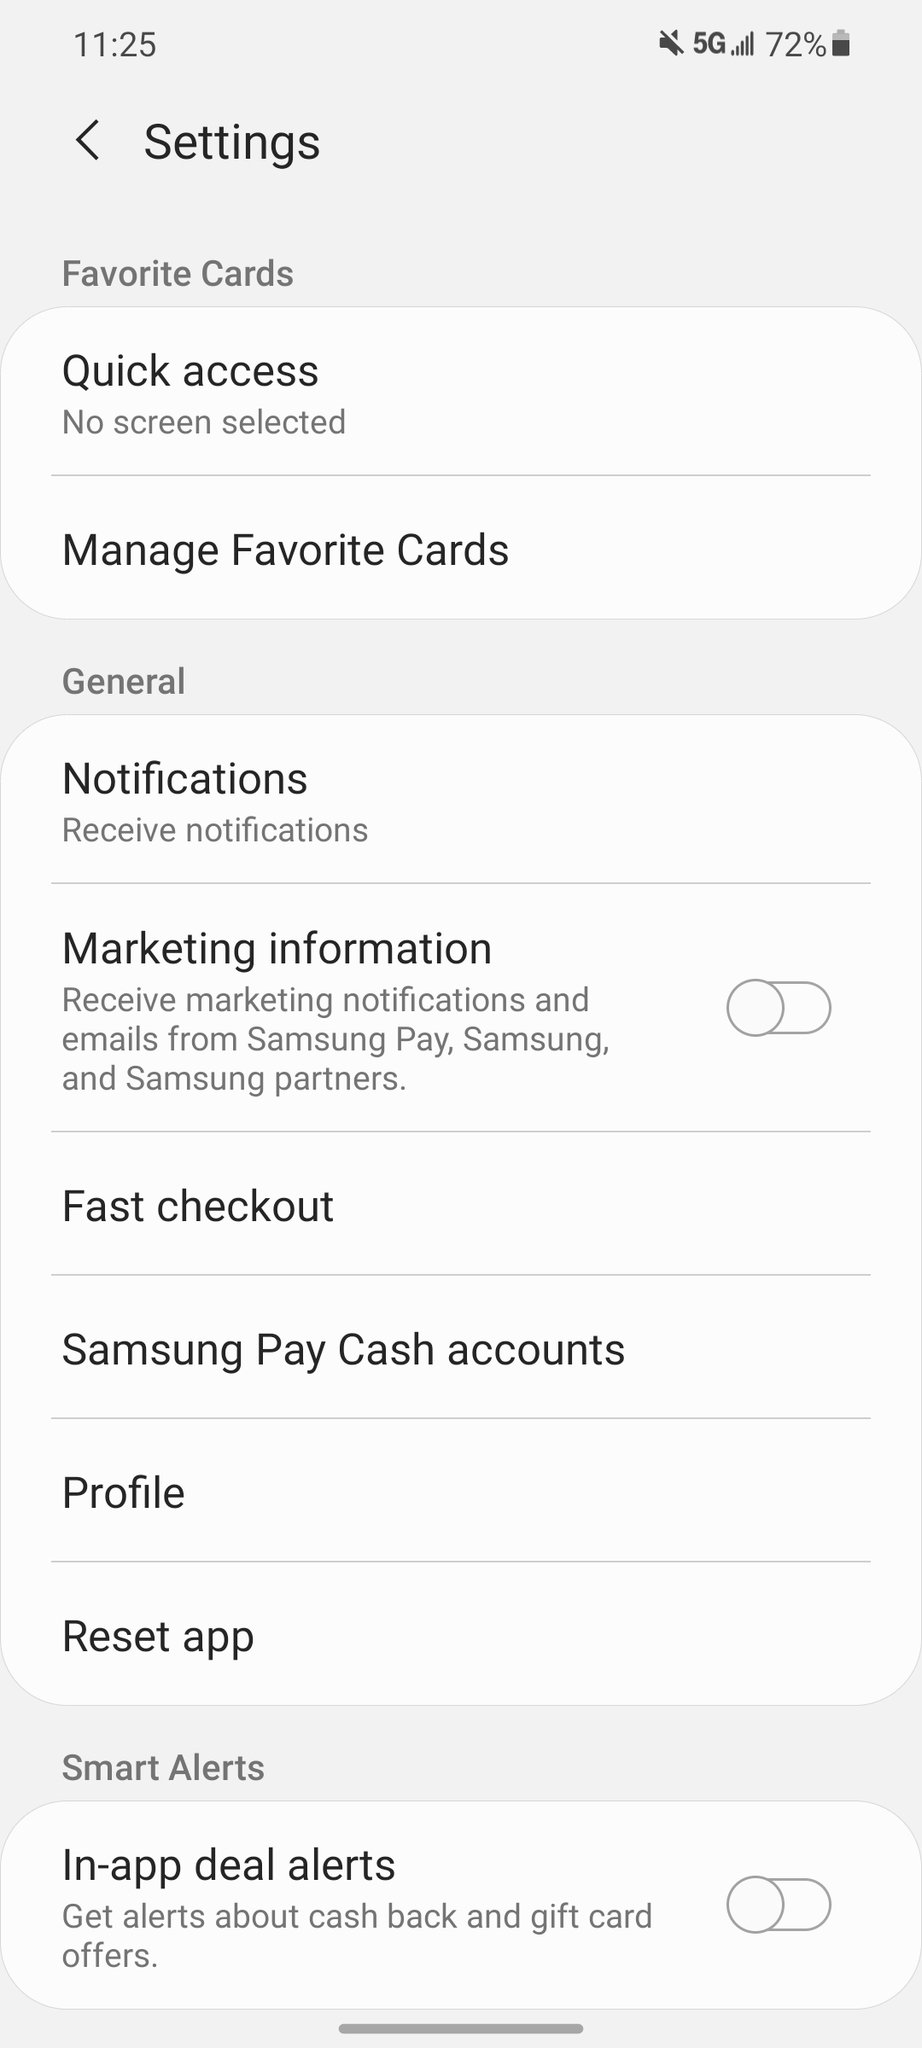 Turning off customized ads on a Samsung phone